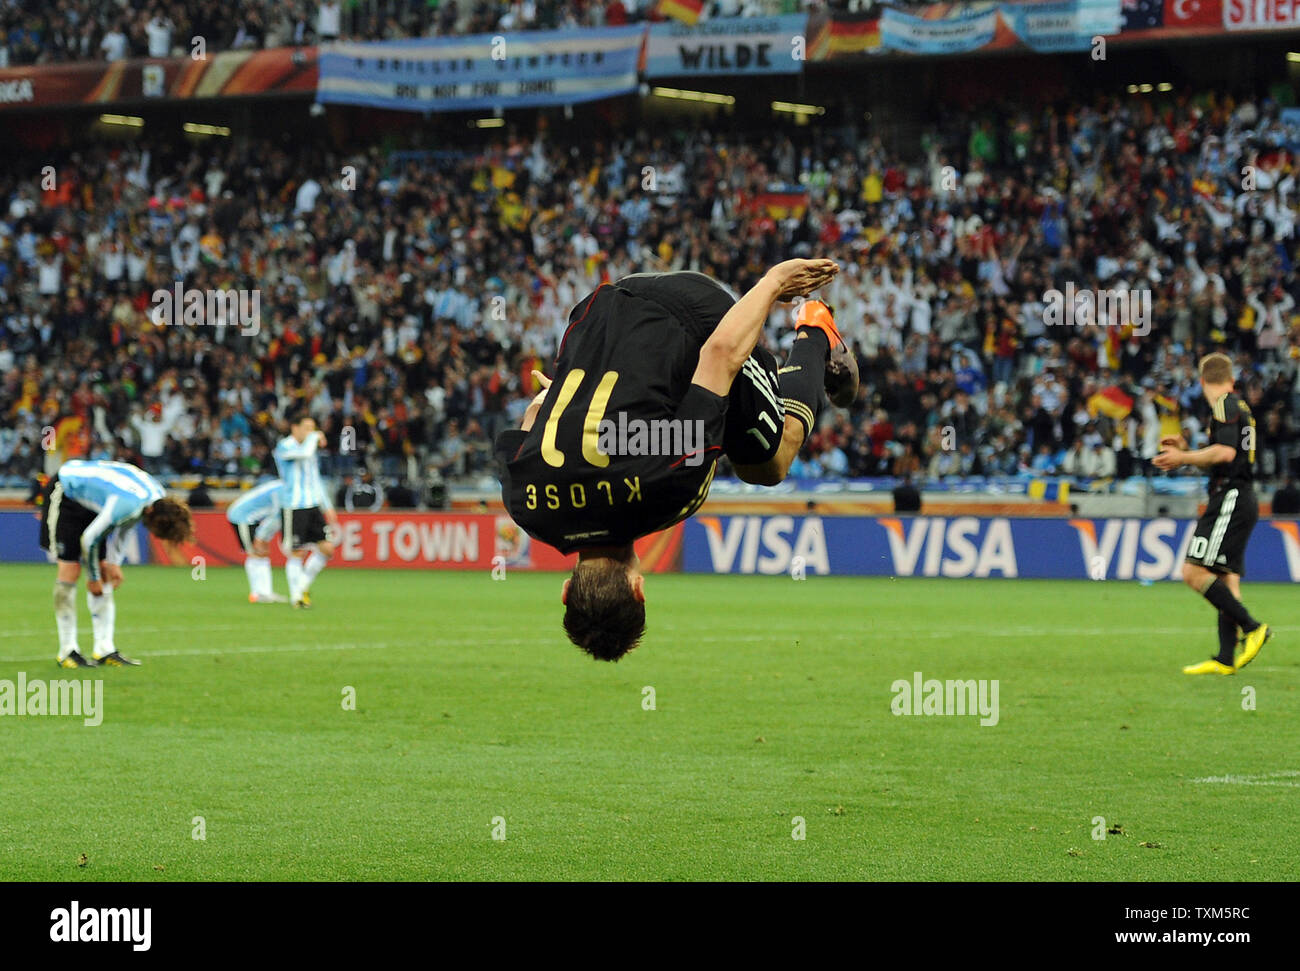 Miroslav Klose of Germany flips as he celebrates scoring his team's fourth goal during the FIFA World Cup Quarter Final match at the Green Point Stadium in Cape Town, South Africa on July 3, 2010. UPI/Chris Brunskill Stock Photo